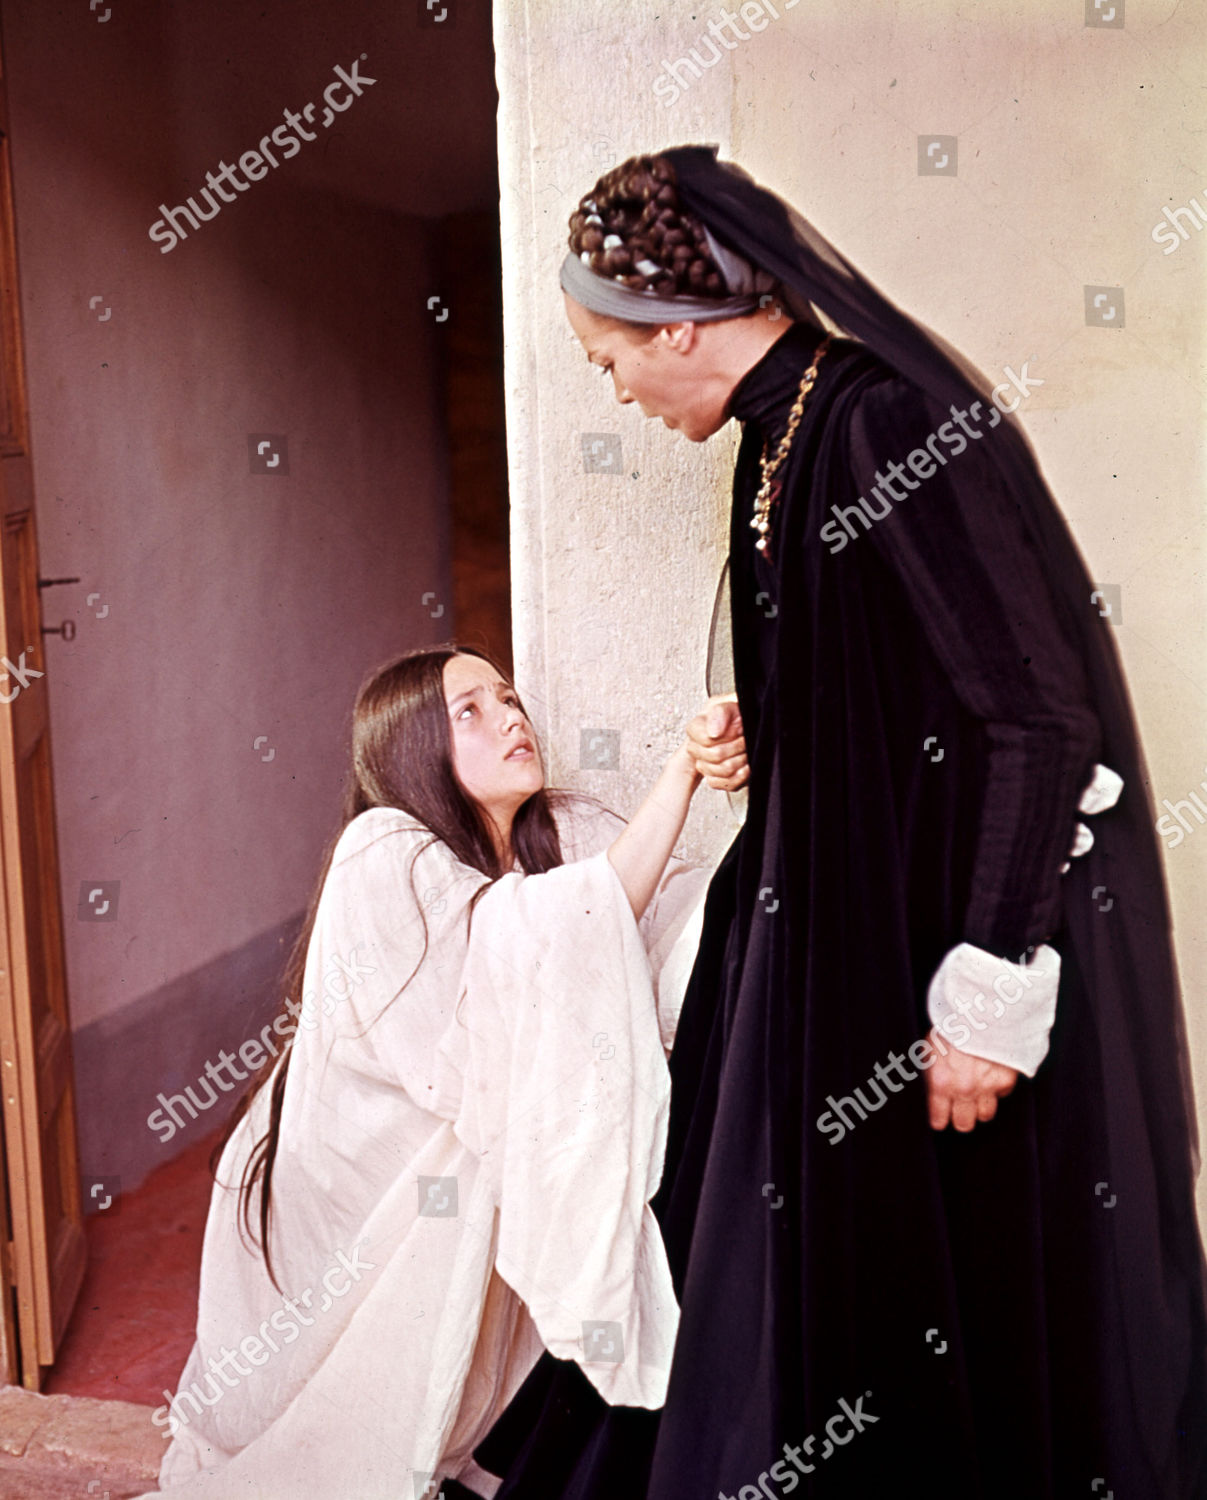 nurse from romeo and juliet 1968